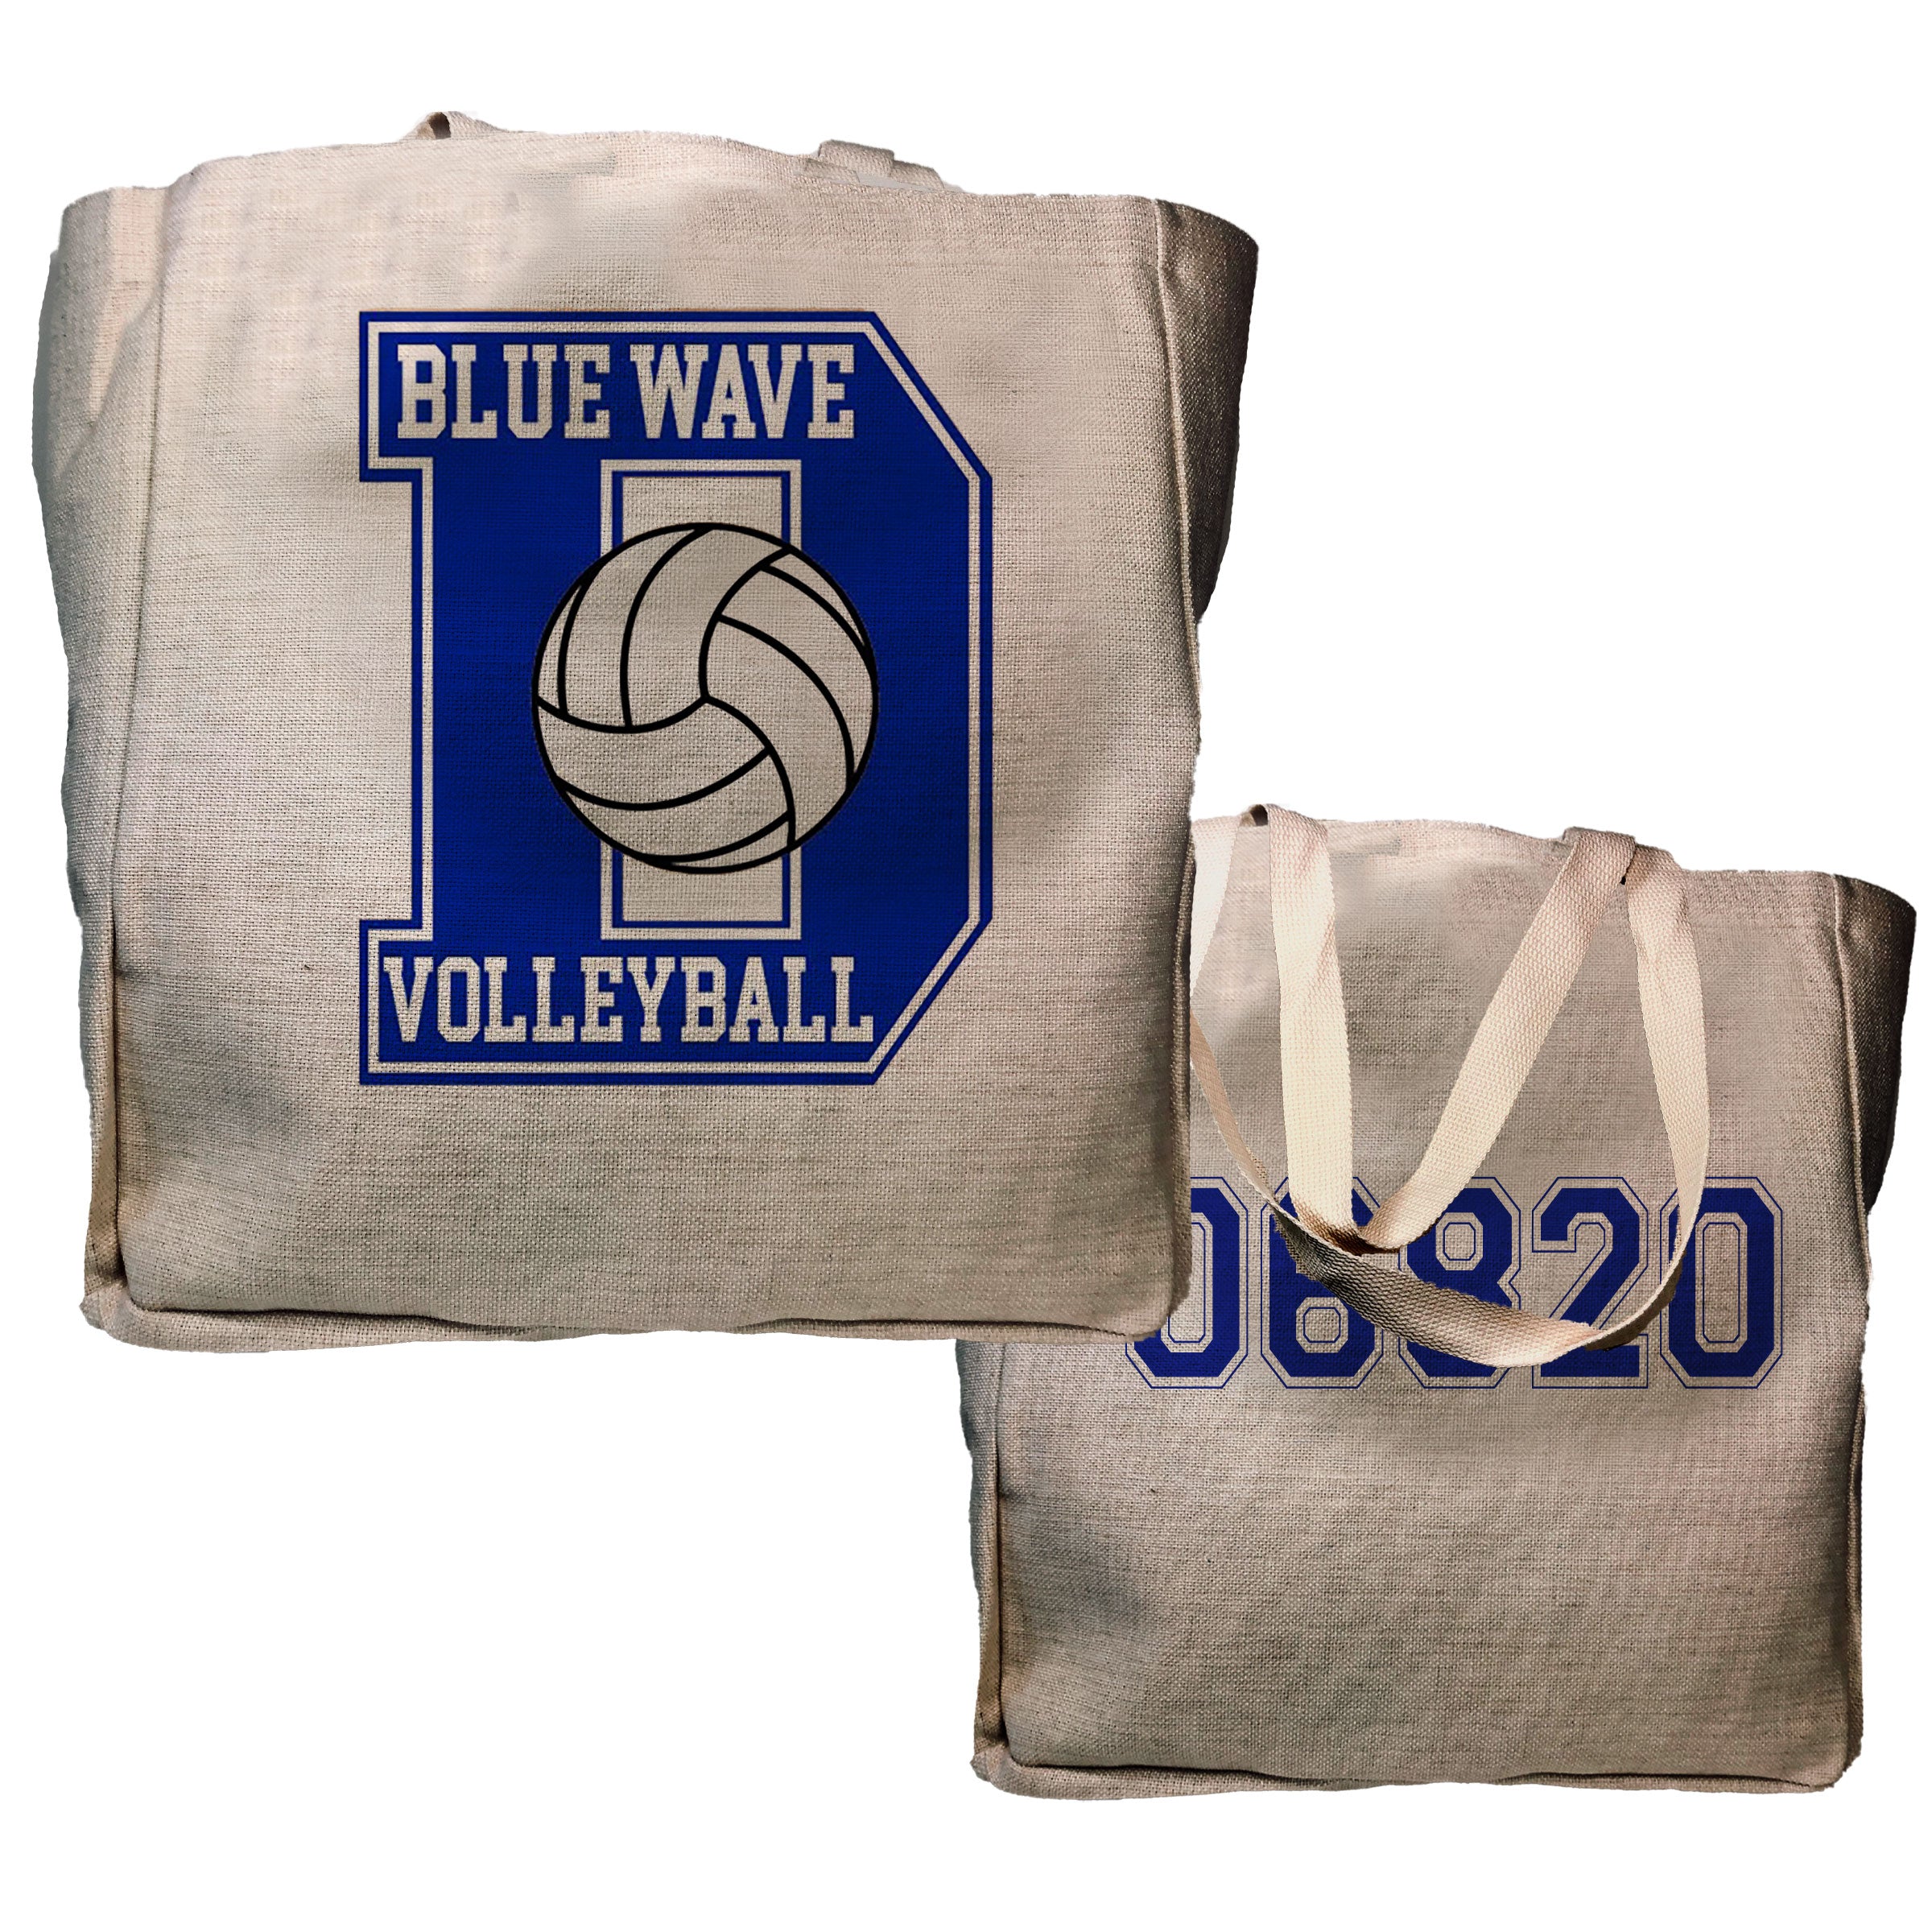 Blue Wave Volleyball Tote - Zip Code